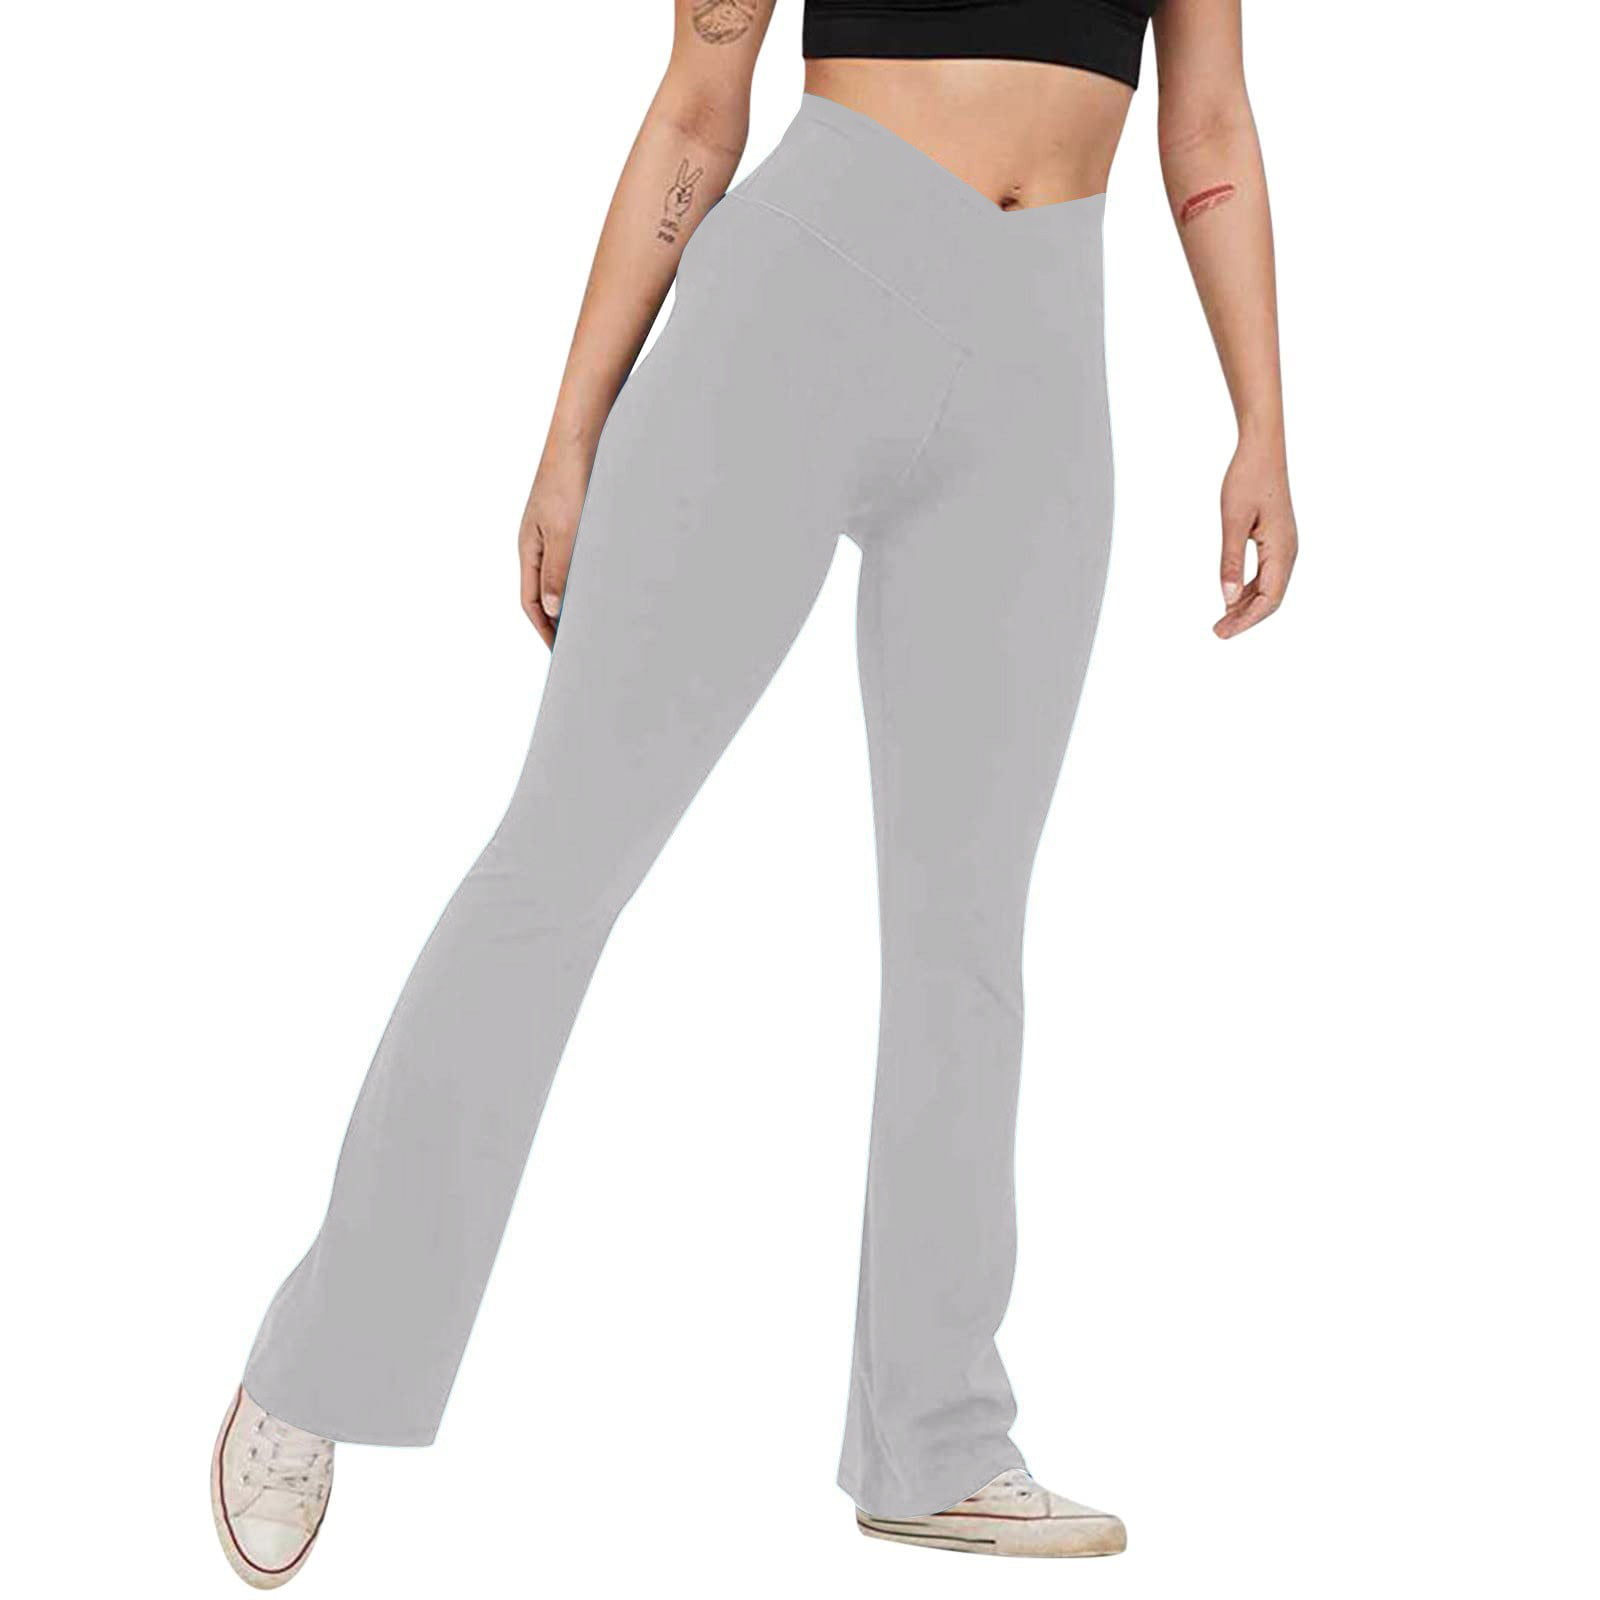 HEGALY Women's Flare Yoga Pants with Pockets - Crossover Flare Leggings  High Waisted Tummy Control Gym Workout Sweatpants, Dark Gray-pocket, XS :  Buy Online at Best Price in KSA - Souq is